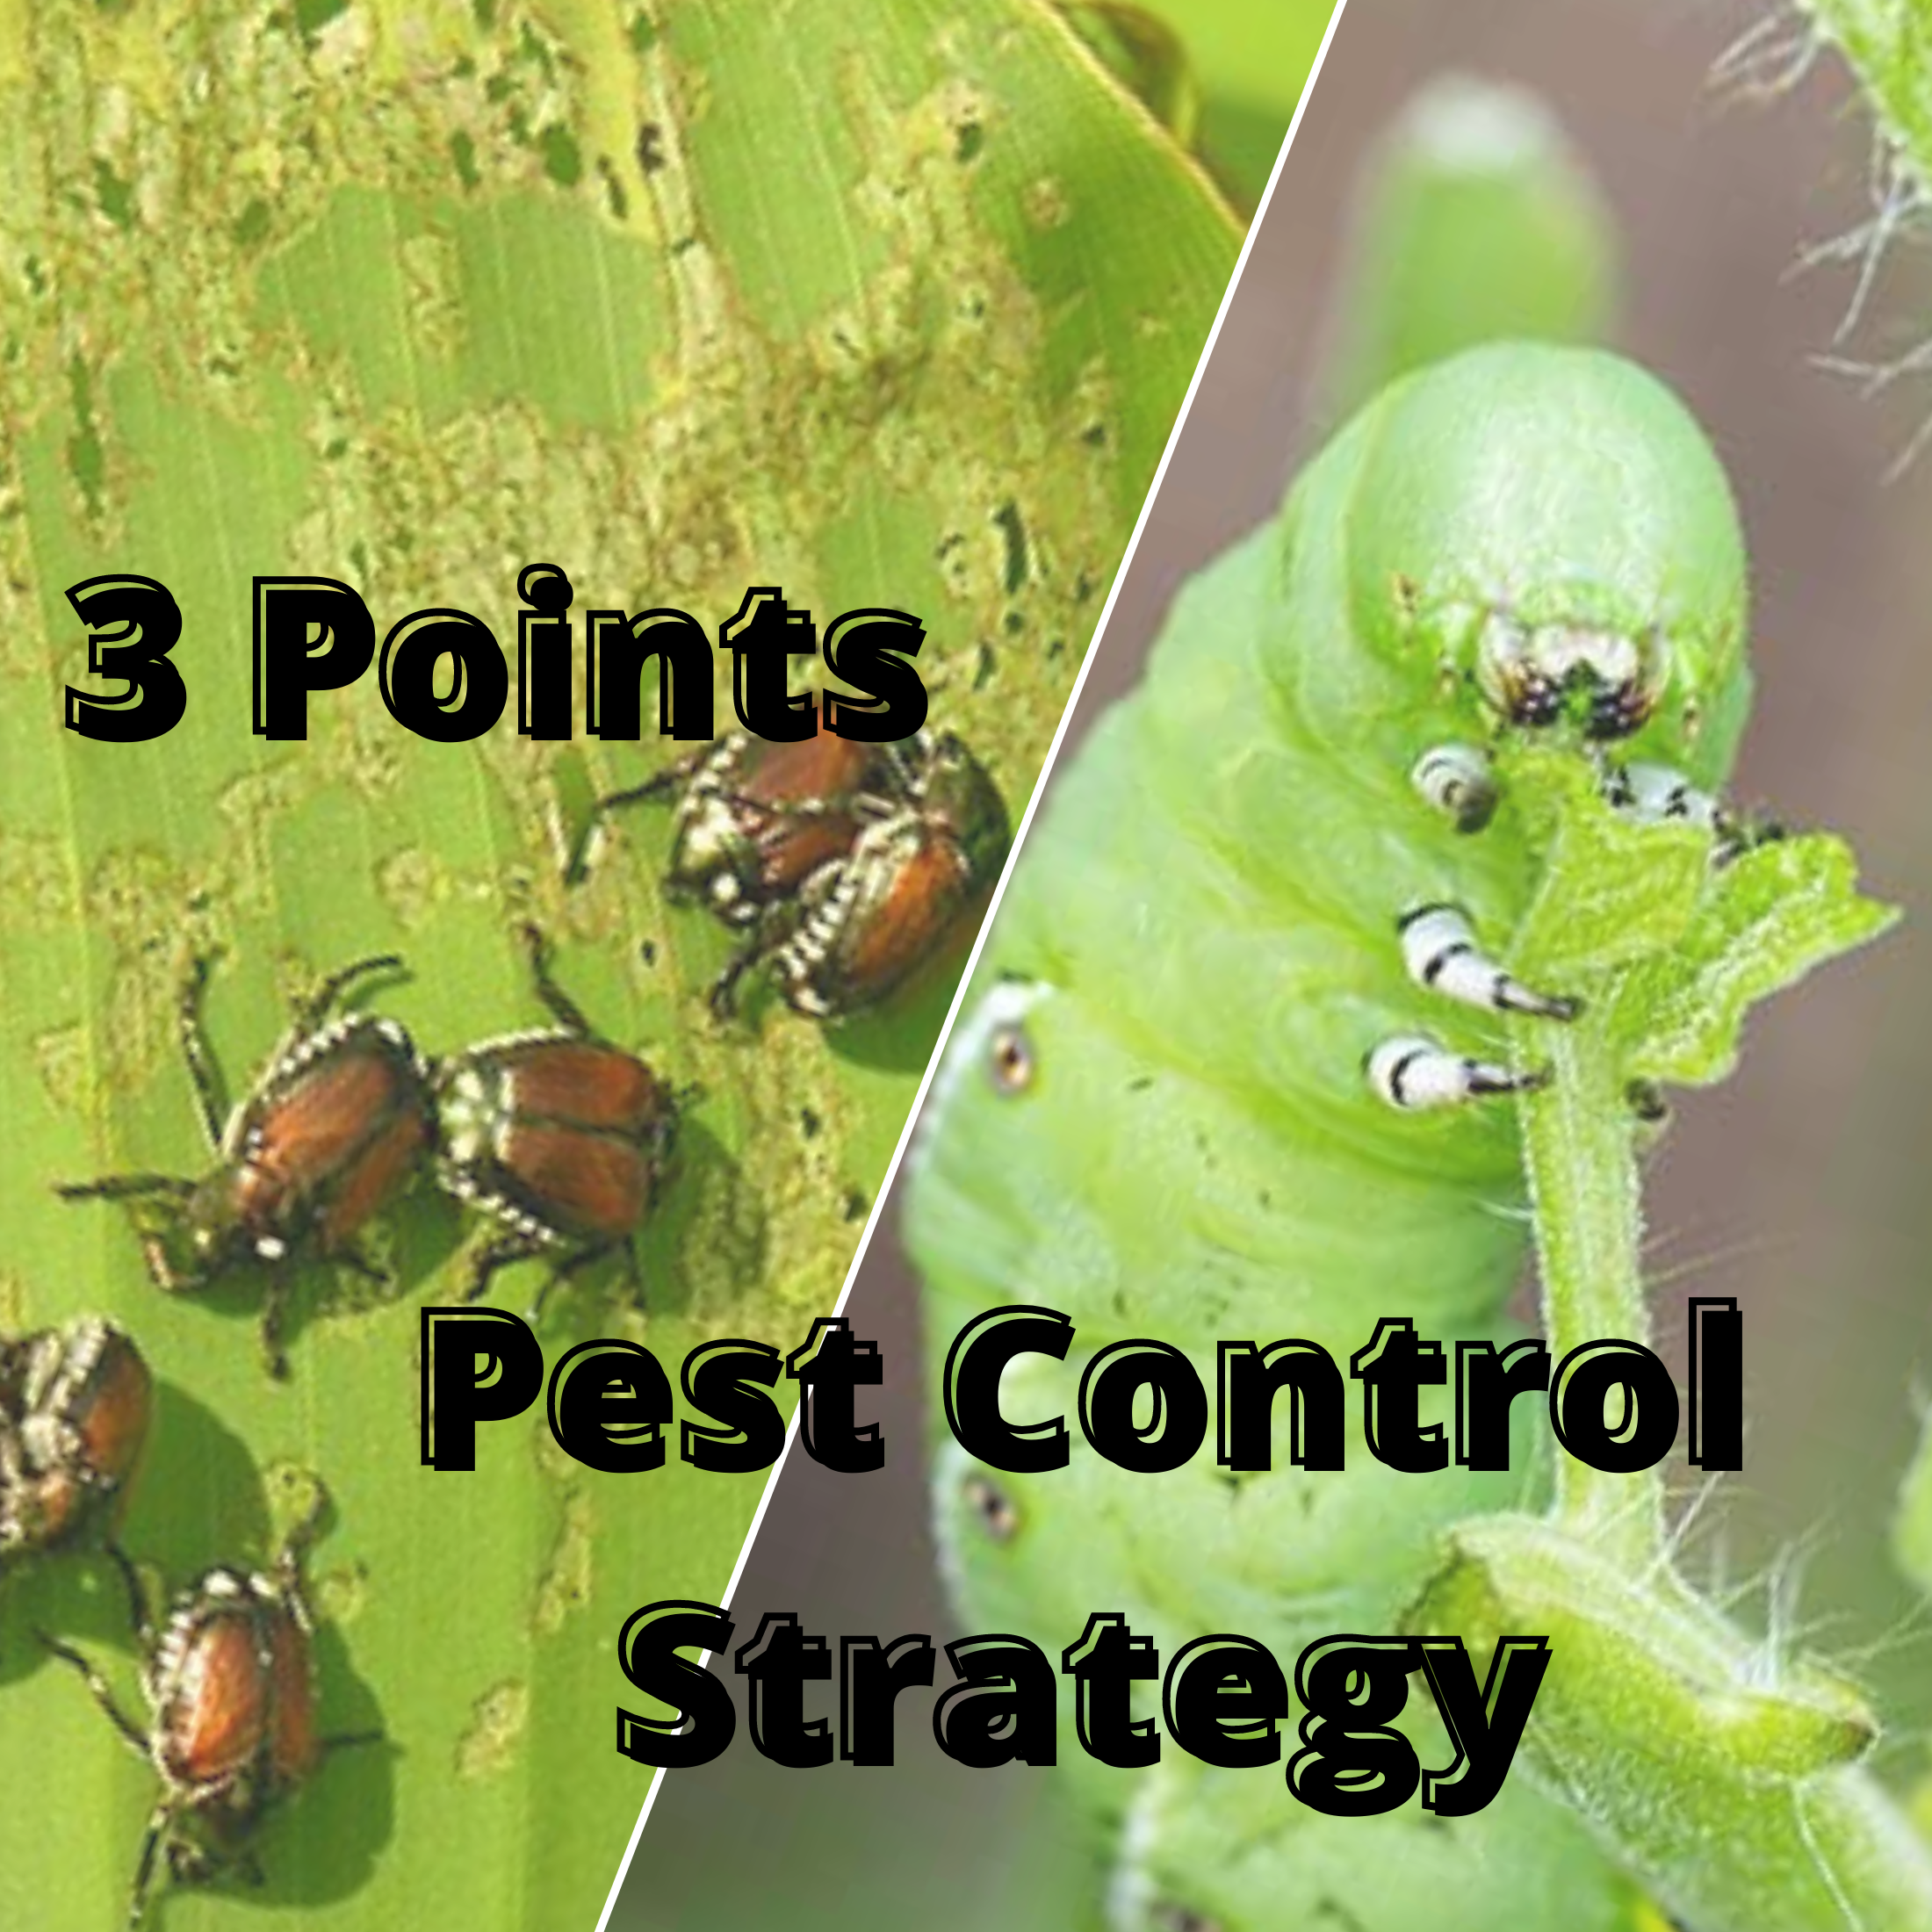 What is 3 point strategy for pest control?